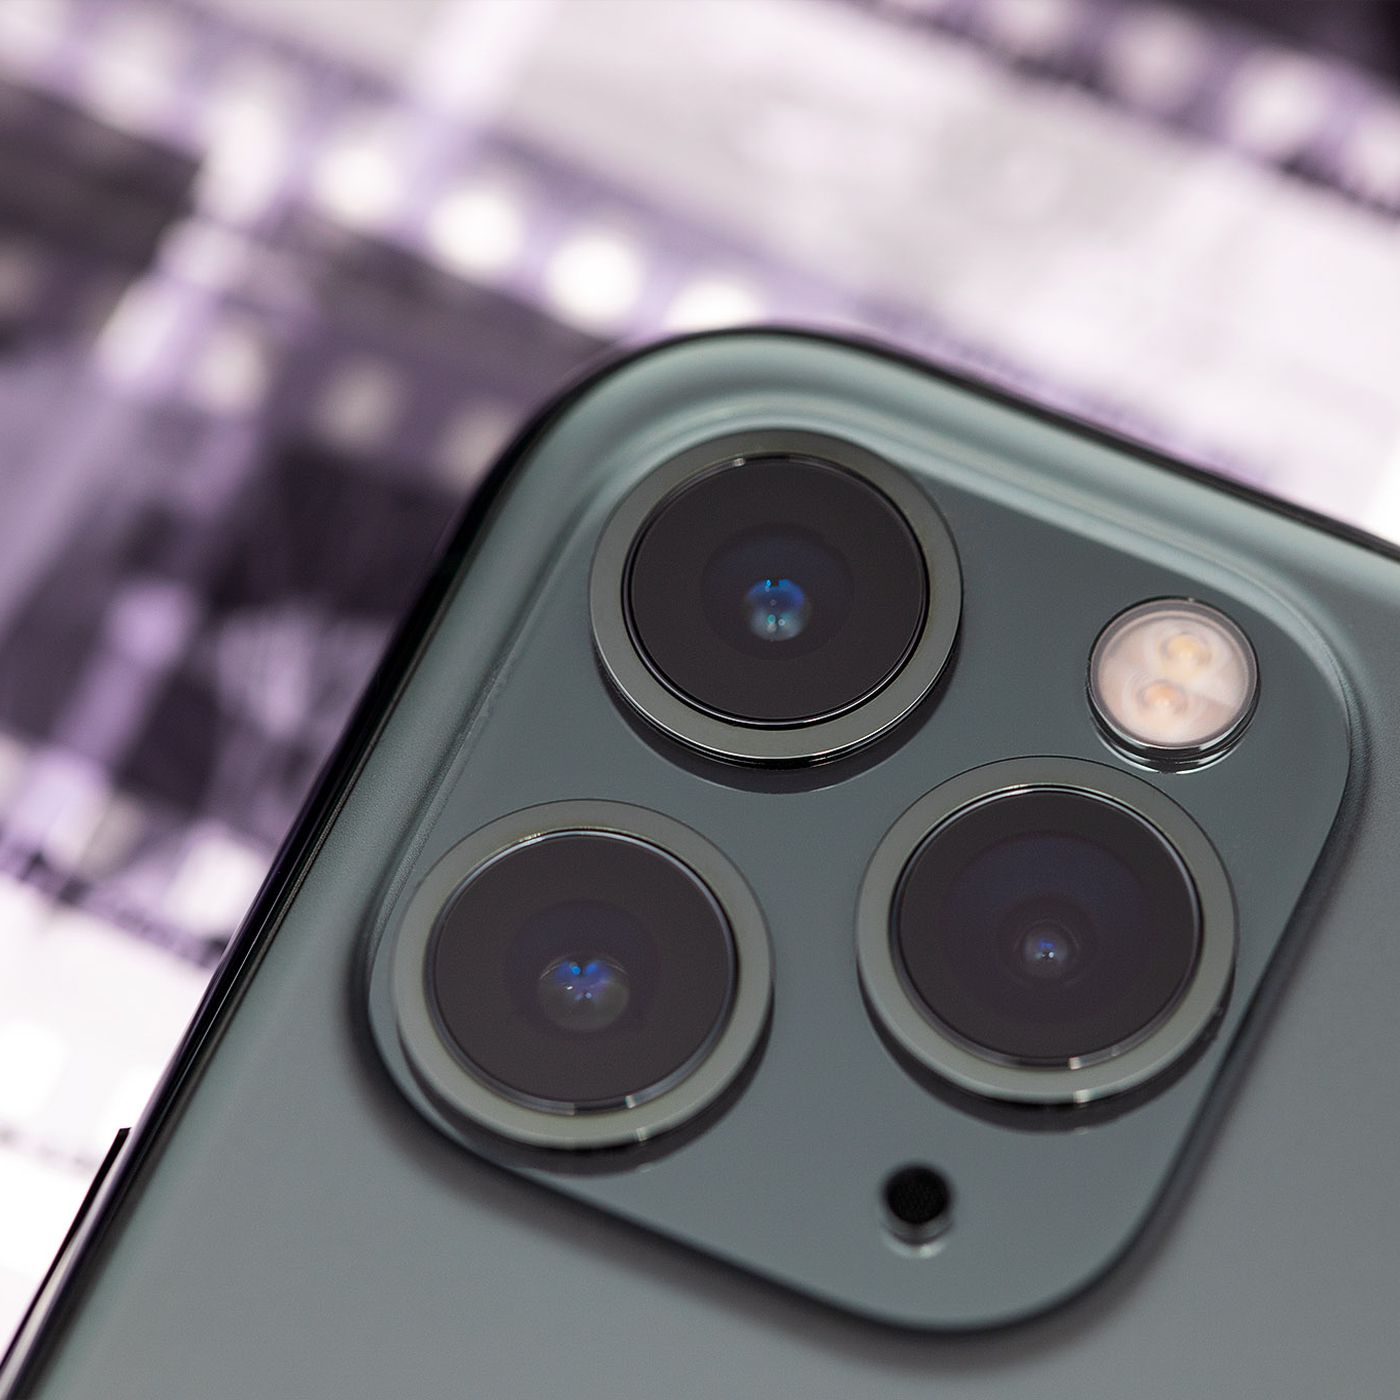 genezen matras brandwond iOS 13.2 finally lets you change video resolution in the camera app — if  you have an iPhone 11 - The Verge